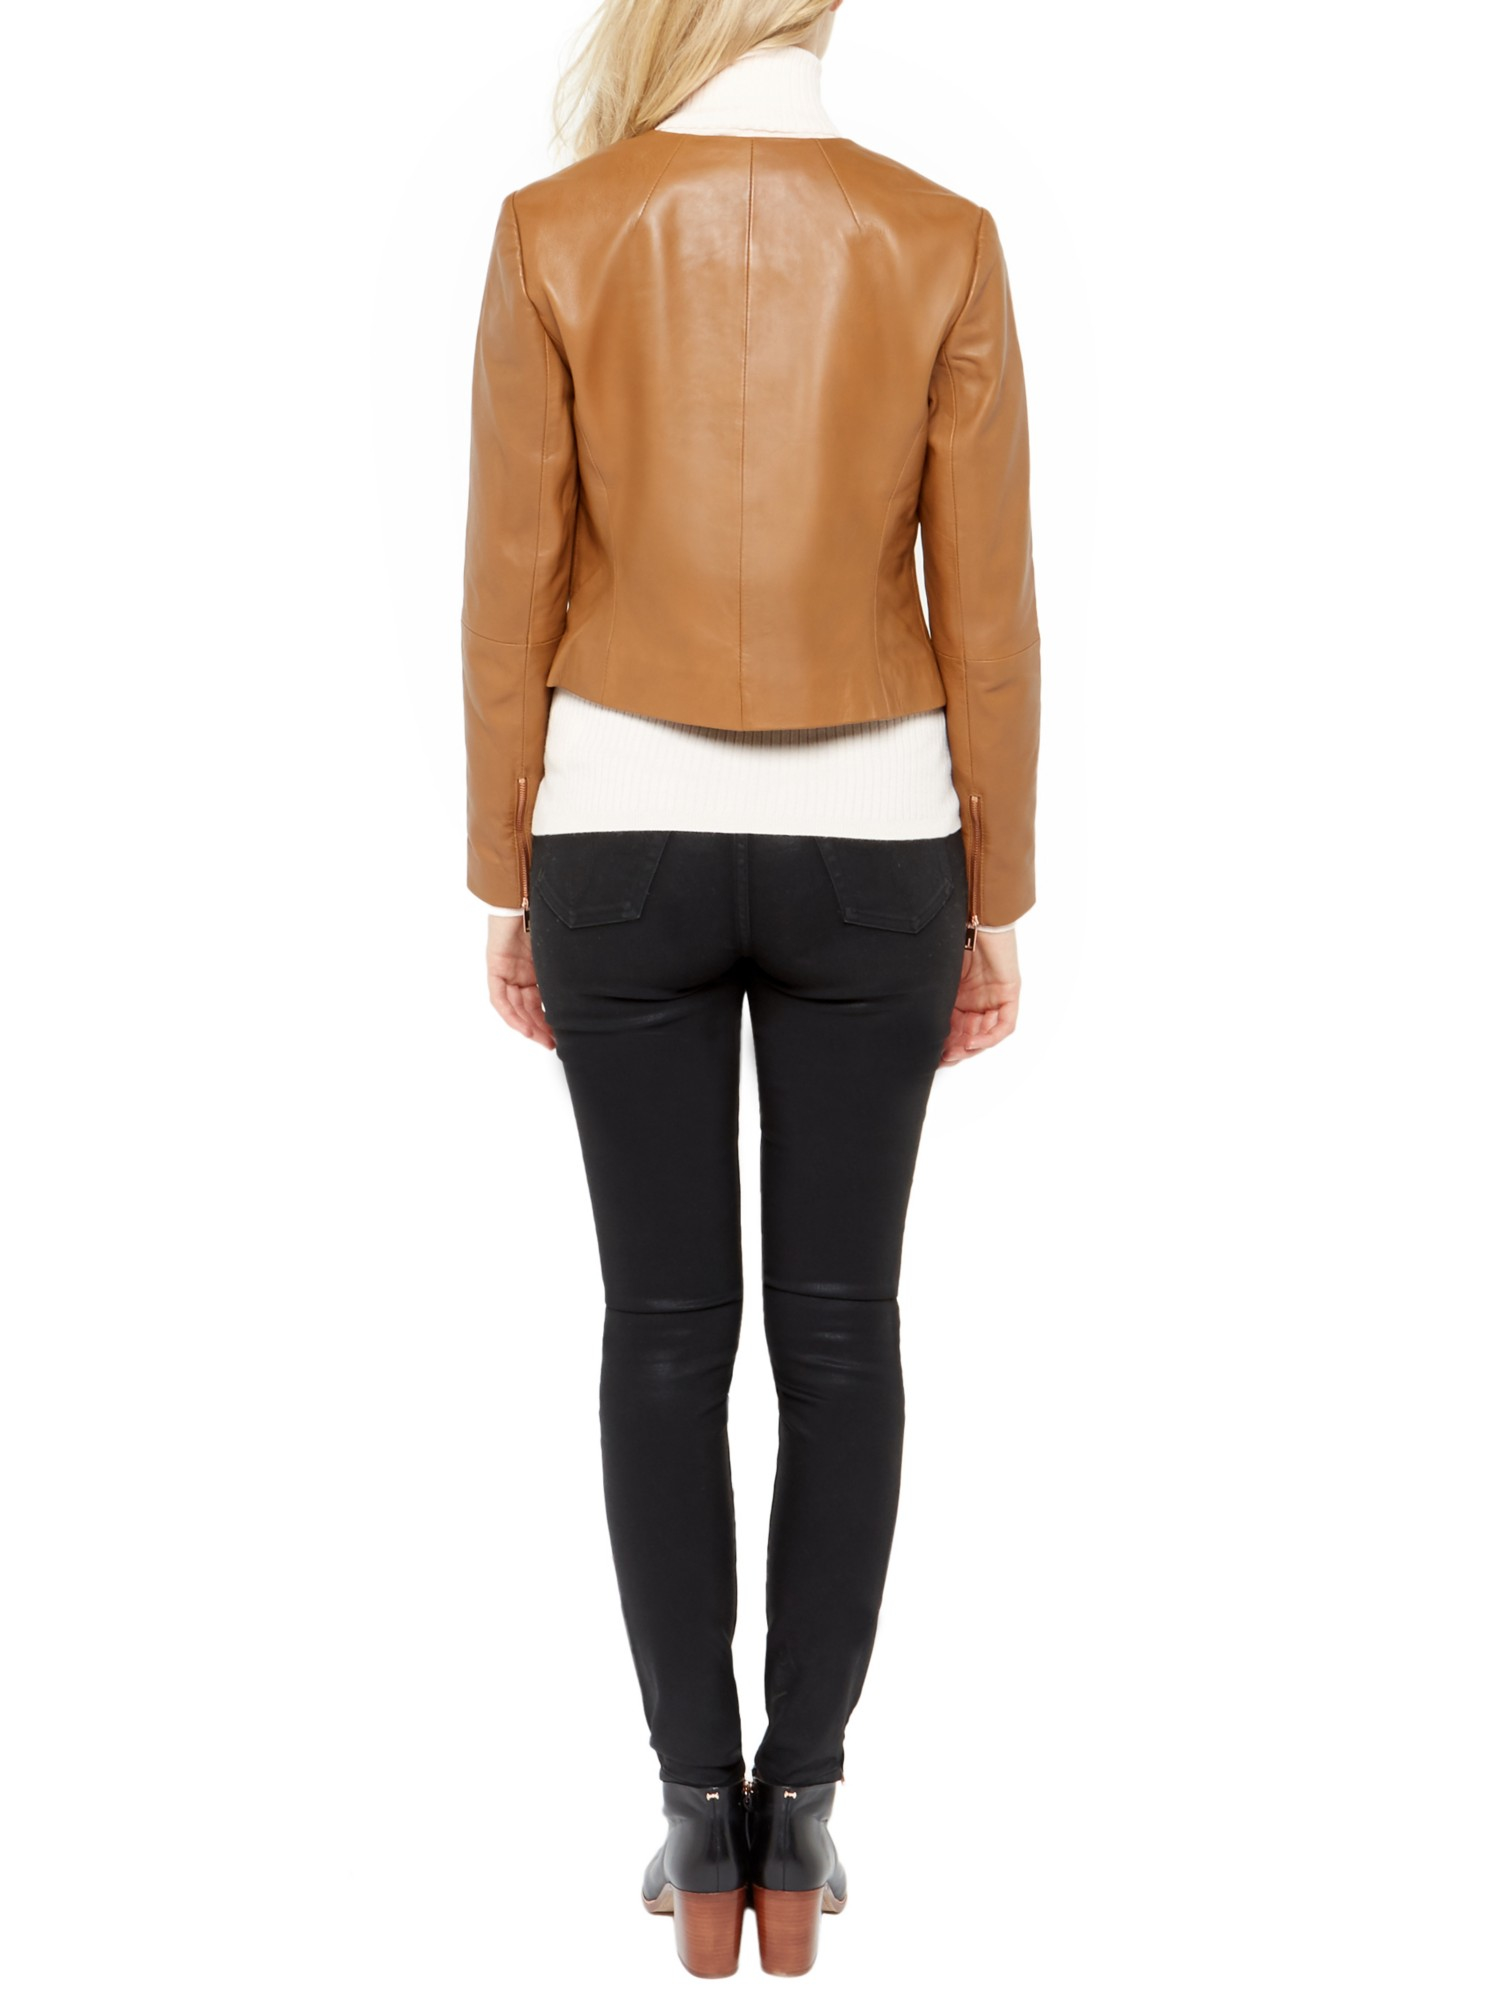 Ted Baker Alam Collarless Leather Jacket in Tan (Brown) - Lyst